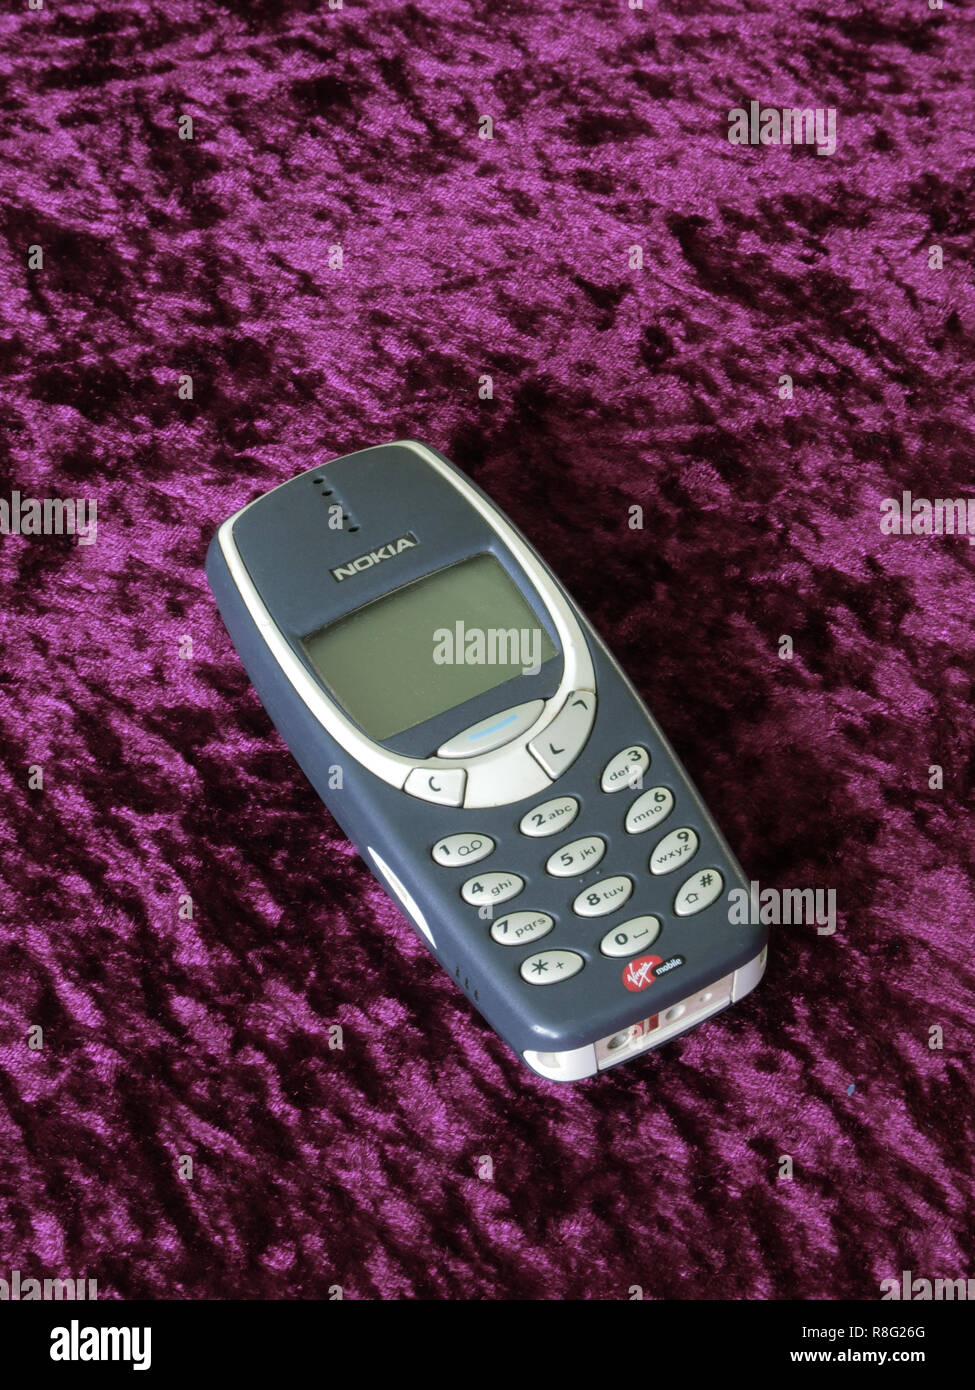 Nokia 3310 Mobile Phone or Cellphone with Virgin Mobile Pay as You Go, UK Stock Photo